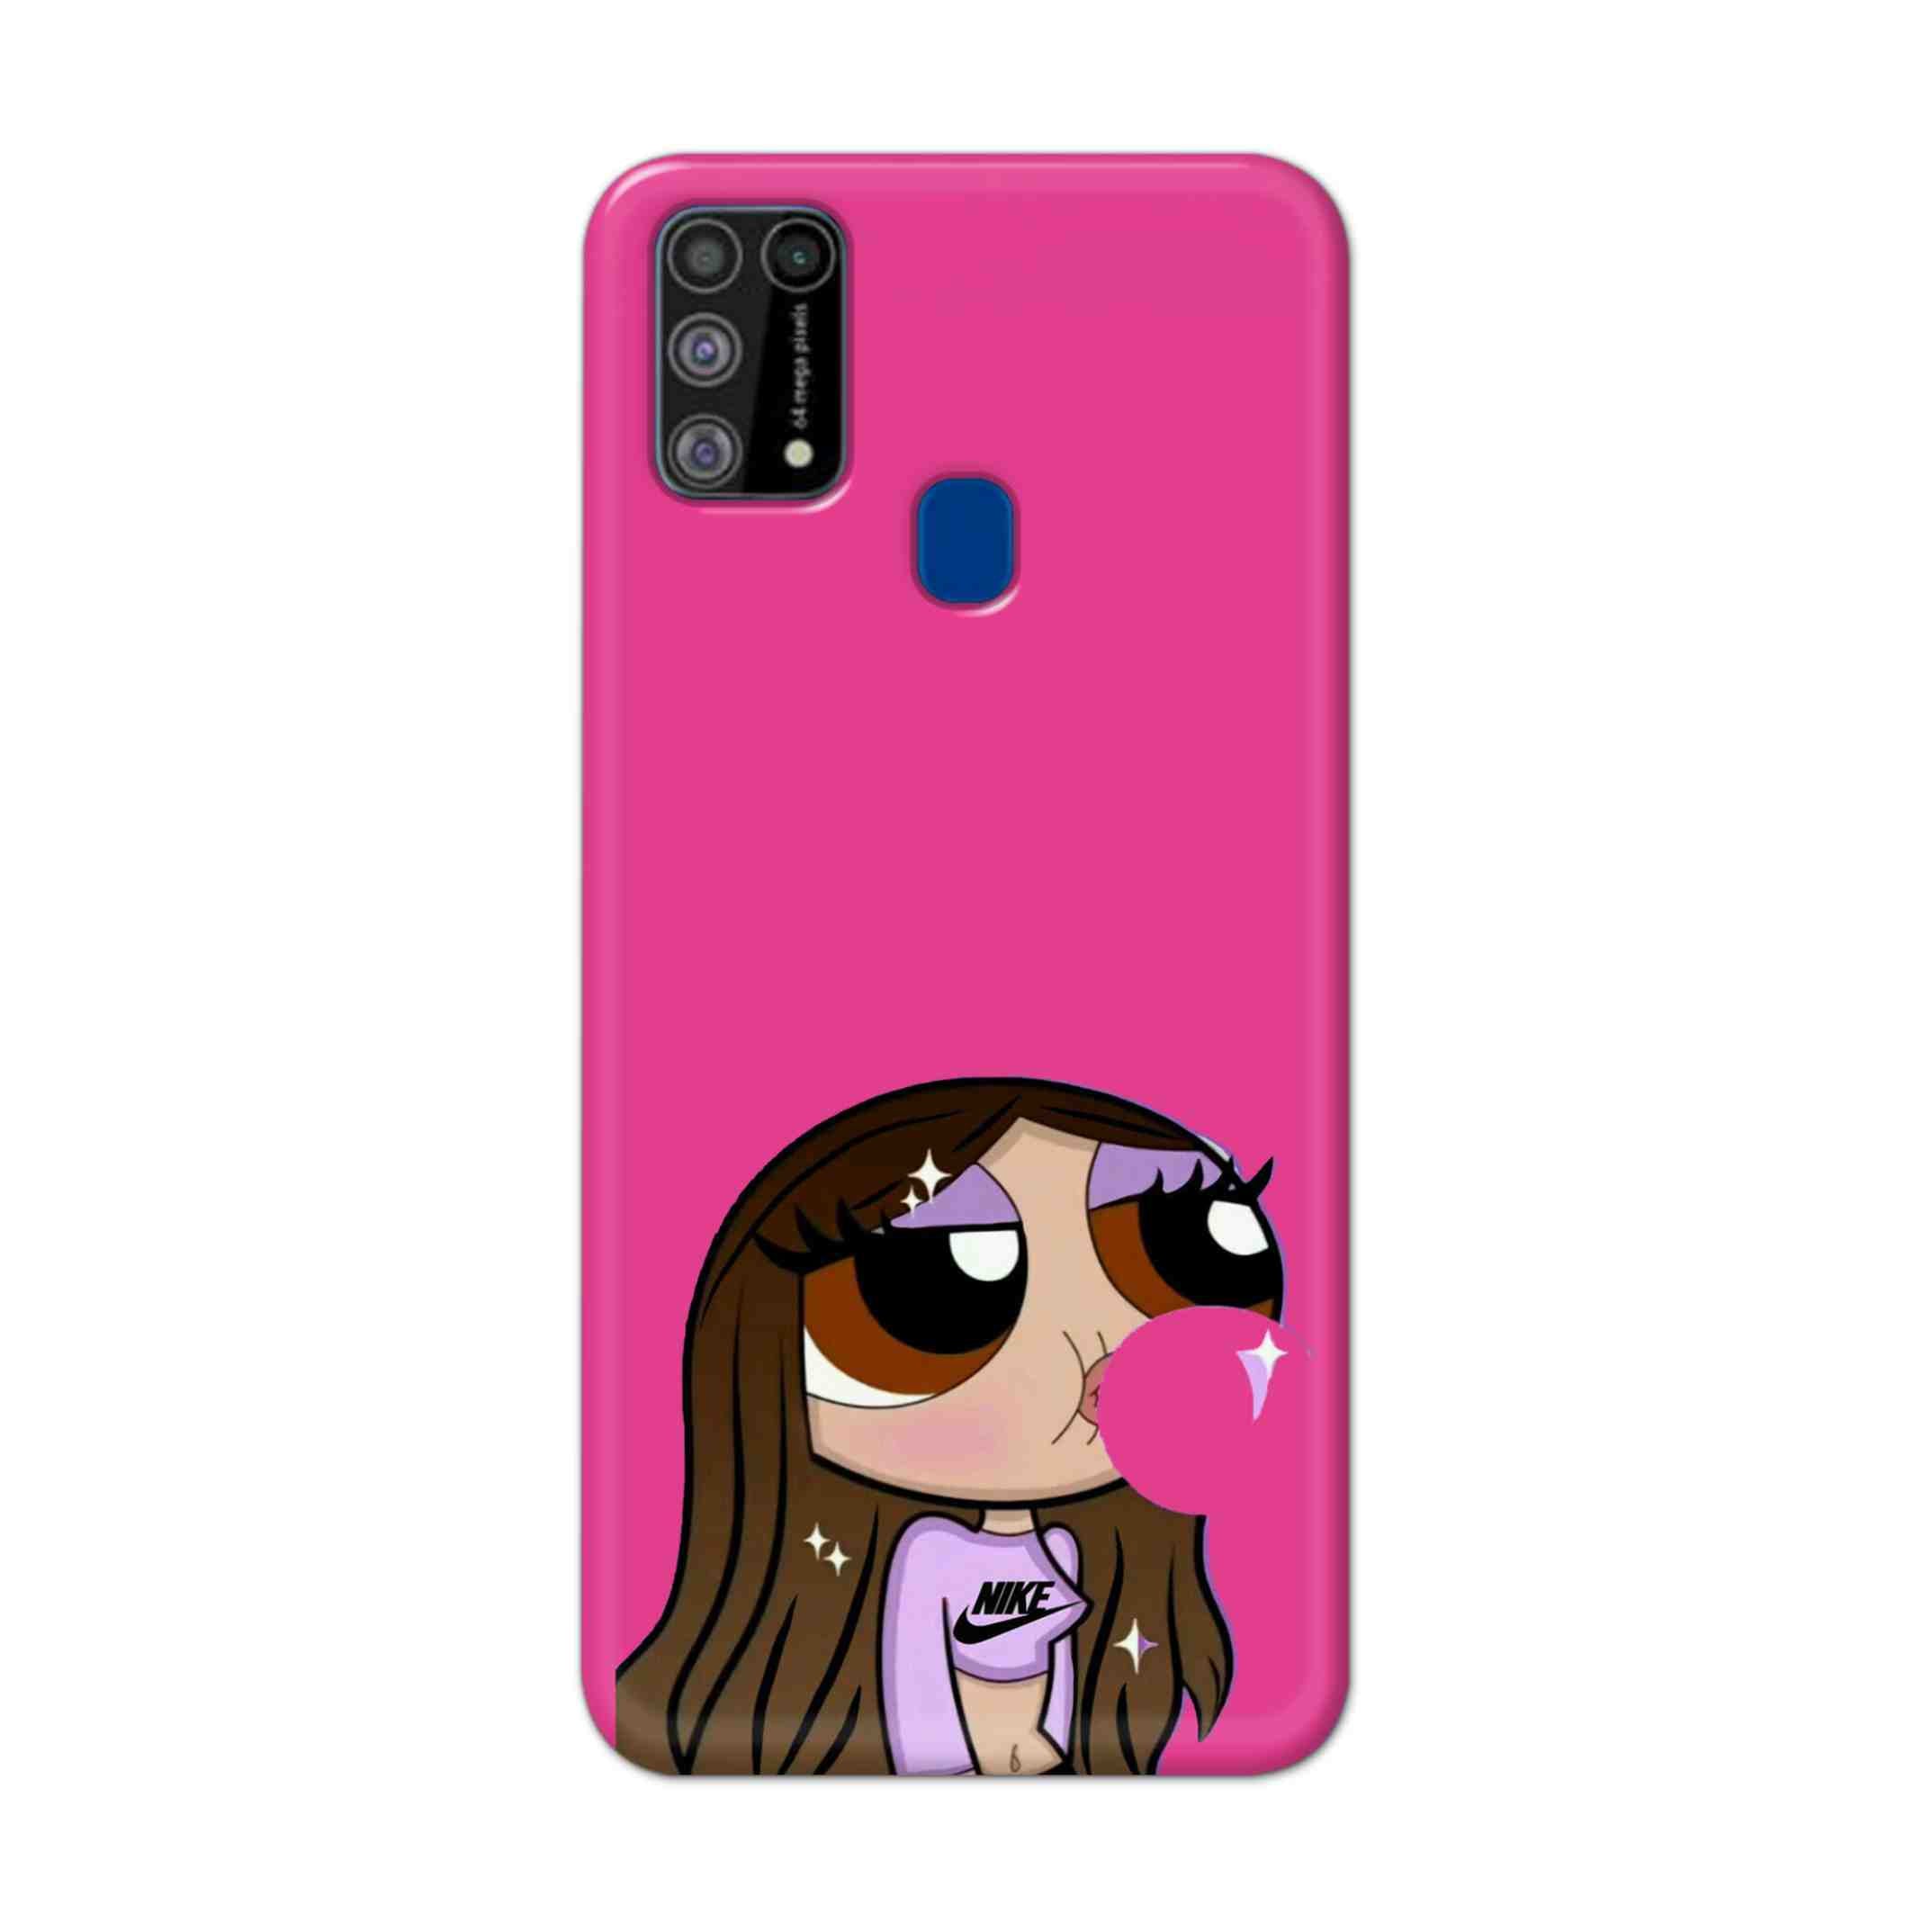 Buy Bubble Girl Hard Back Mobile Phone Case Cover For Samsung Galaxy M31 Online